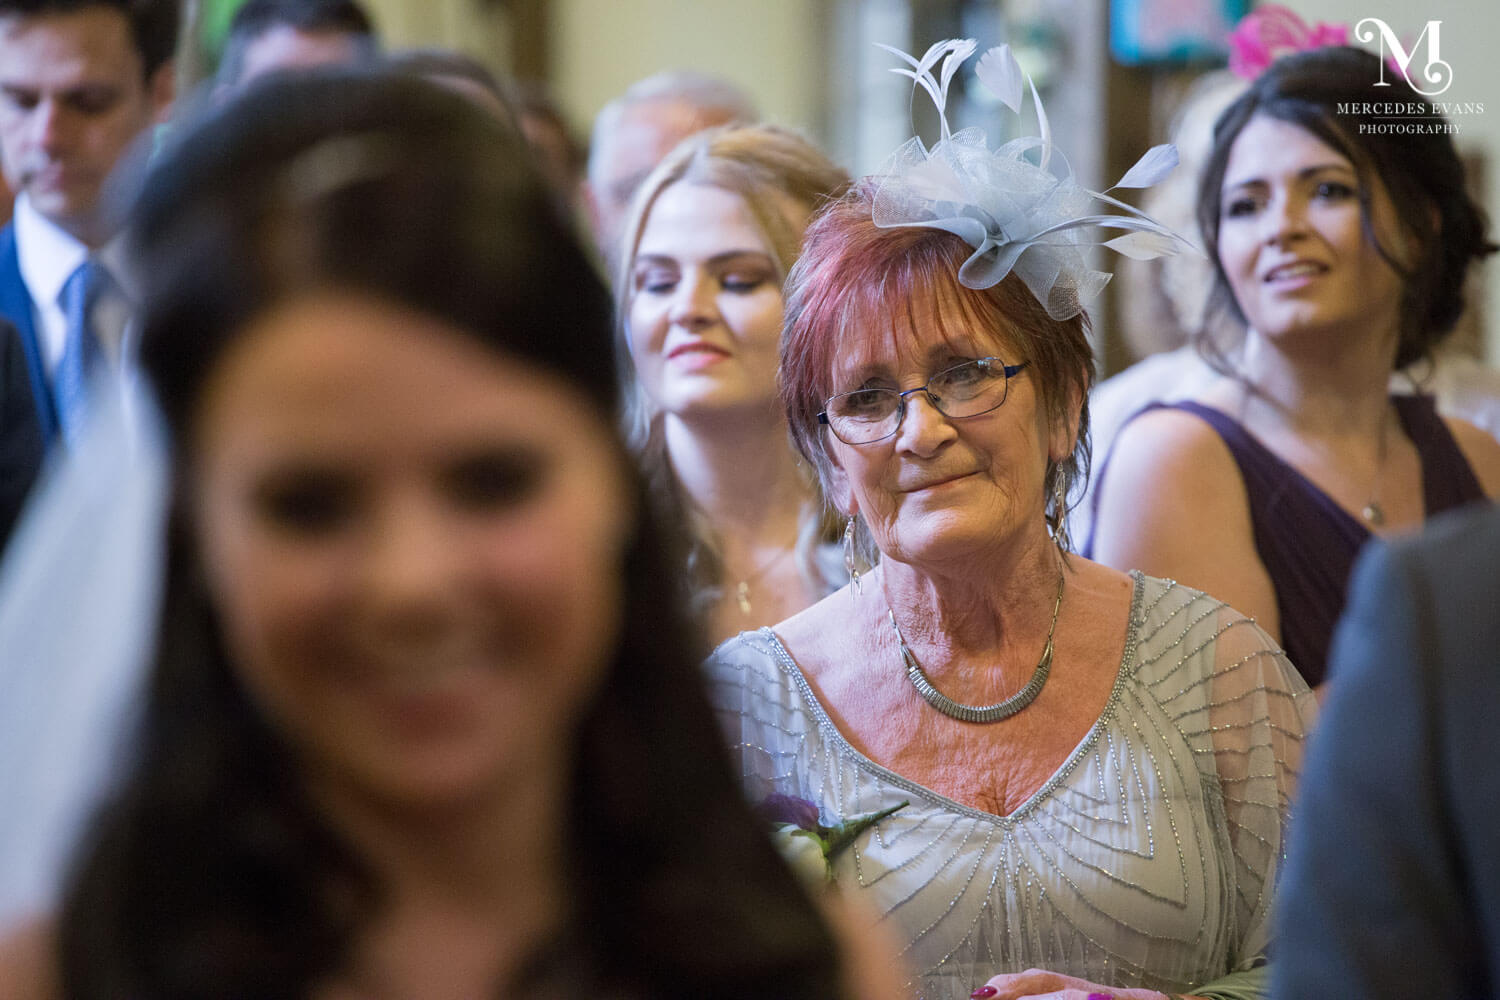 Nan watches her granddaughter getting married in church